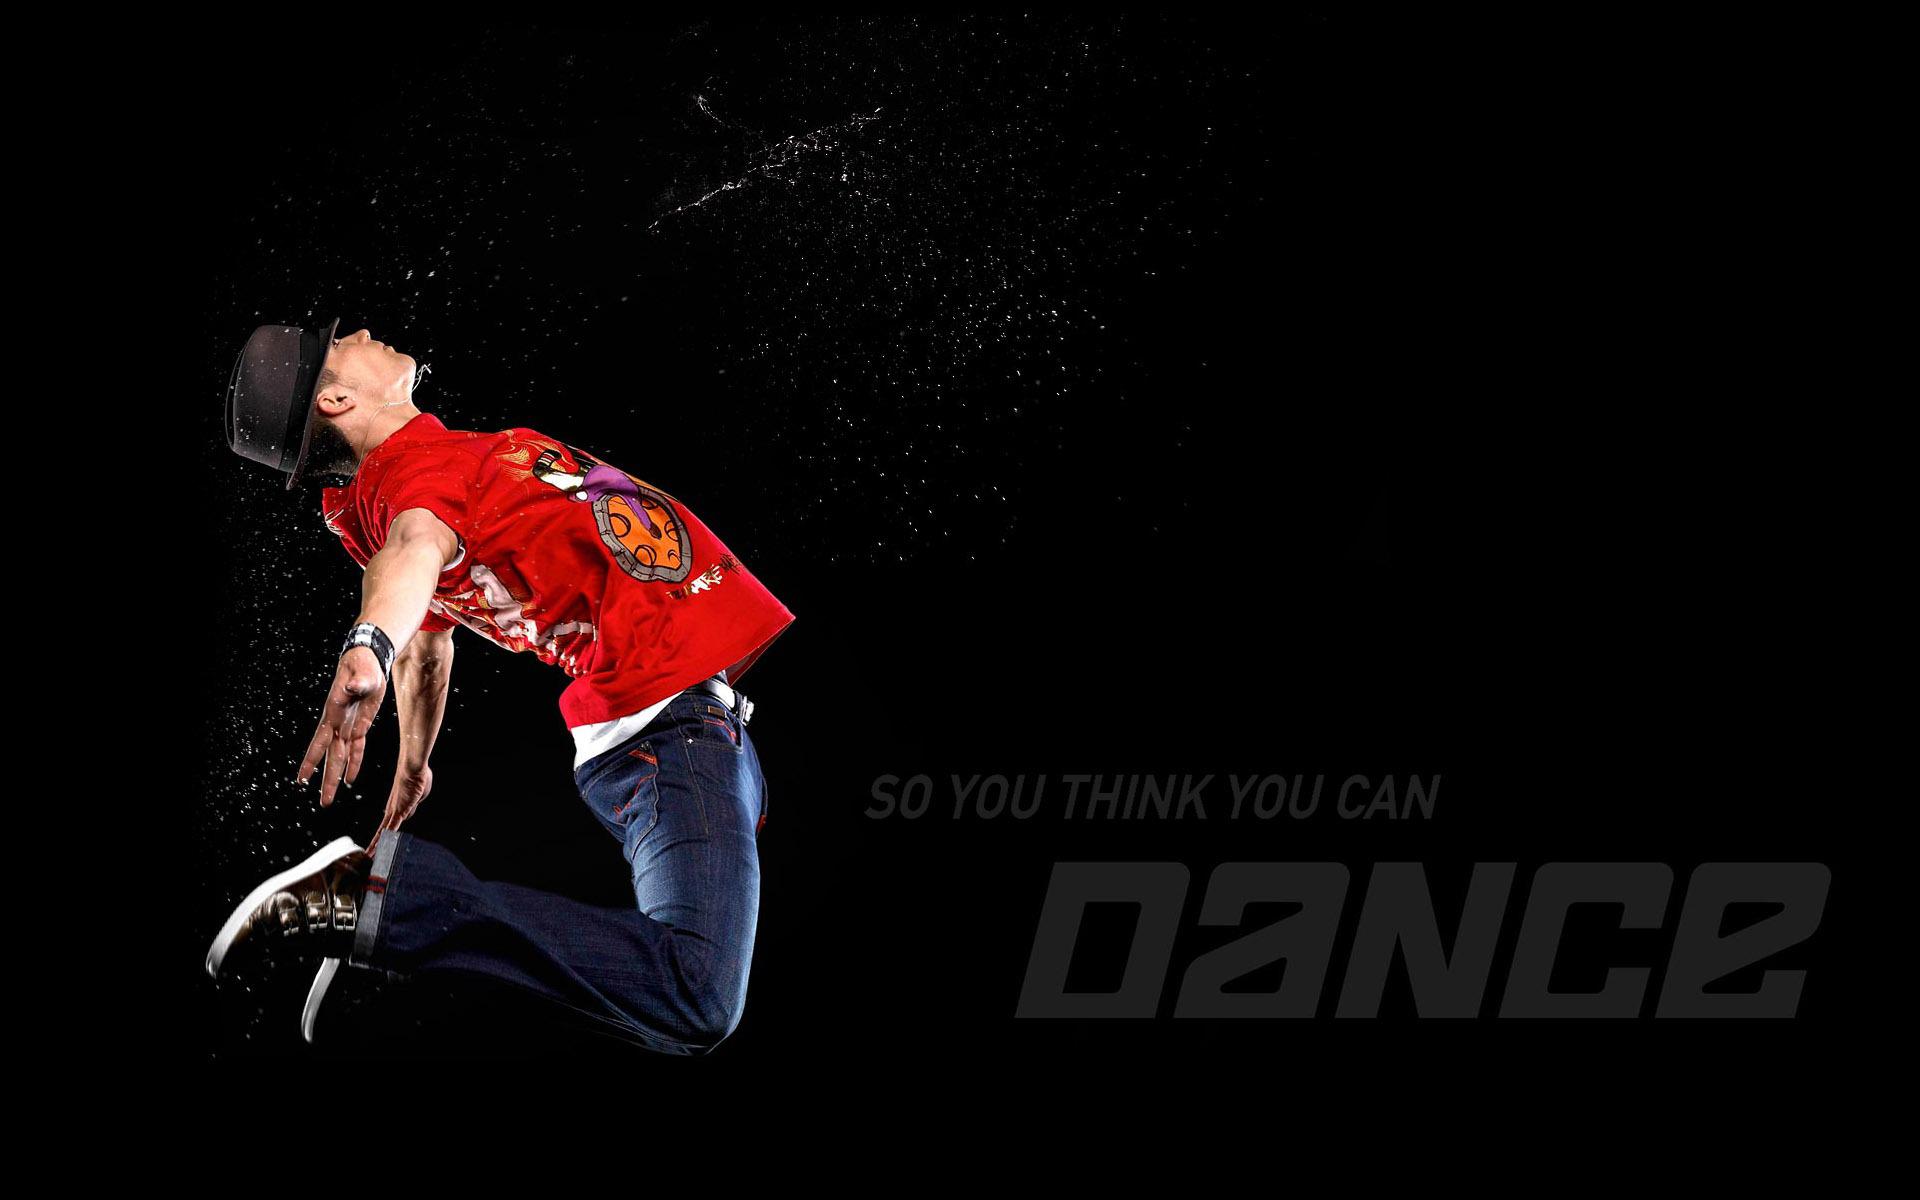 So You Think You Can Dance wallpaper | other | Wallpaper Better